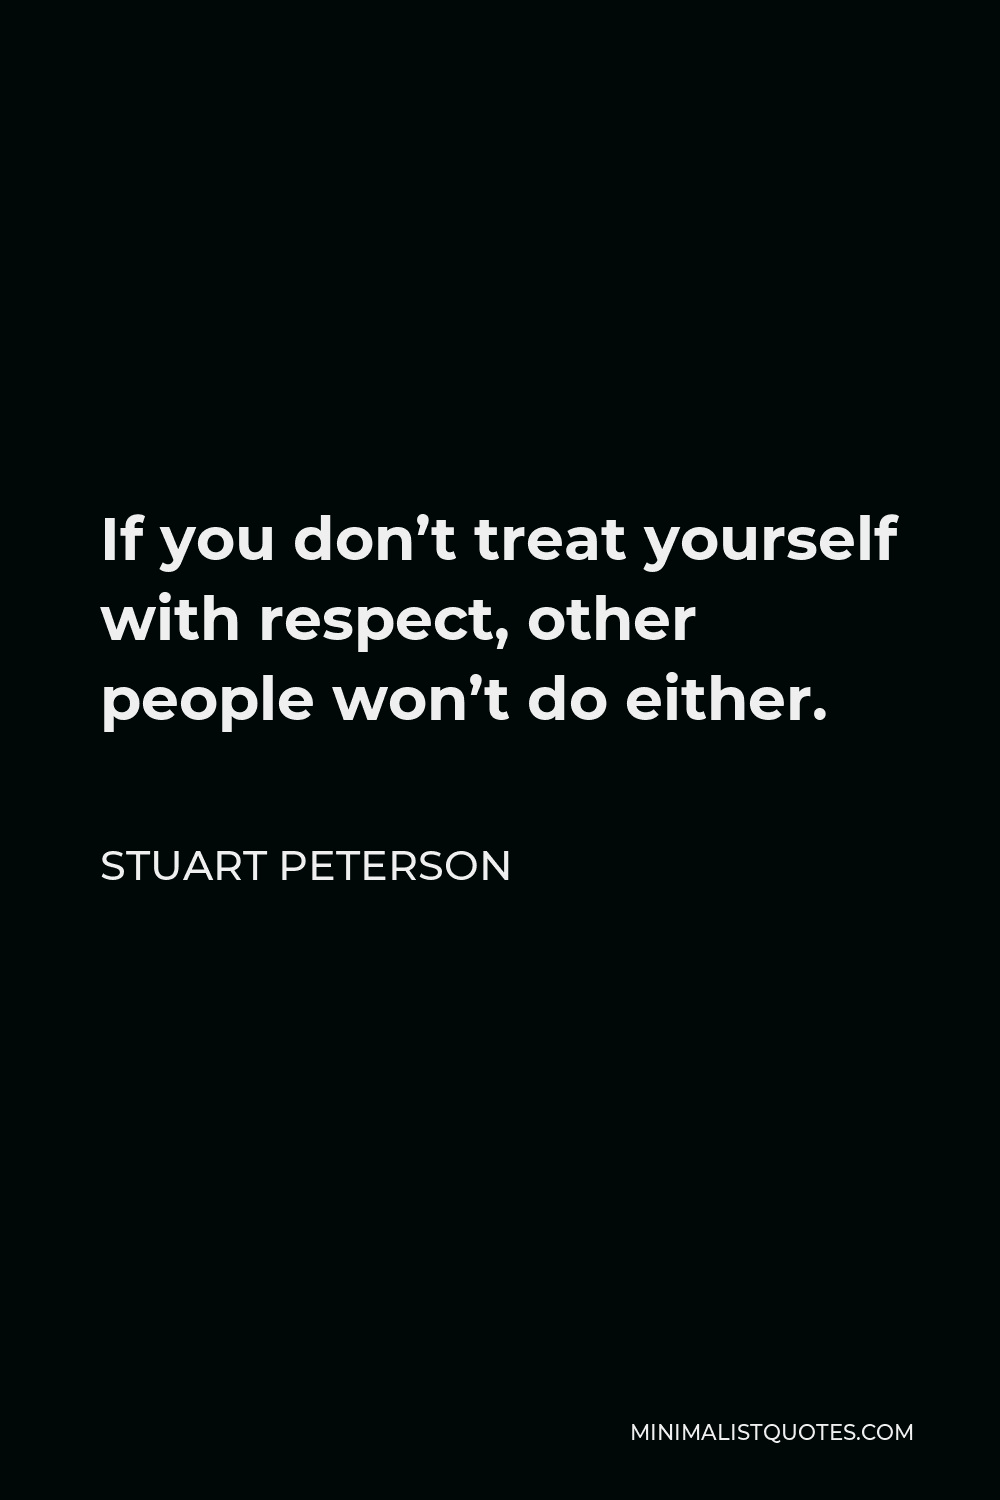 Stuart Peterson Quote - If you don’t treat yourself with respect, other people won’t do either.